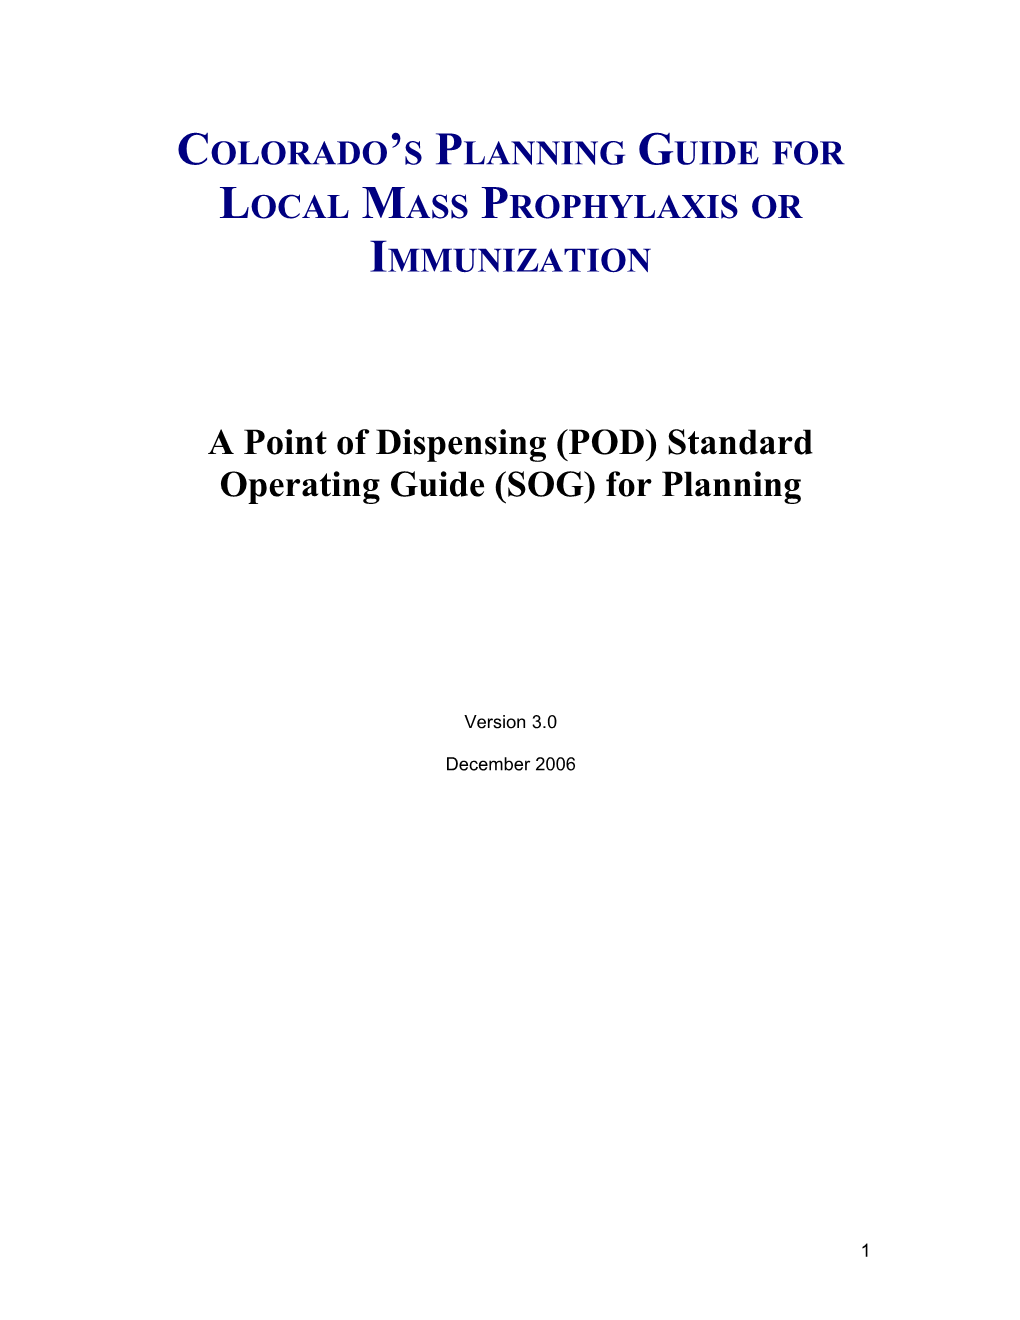 POD/Mass Clinic Template for Standard Operating Guidelines